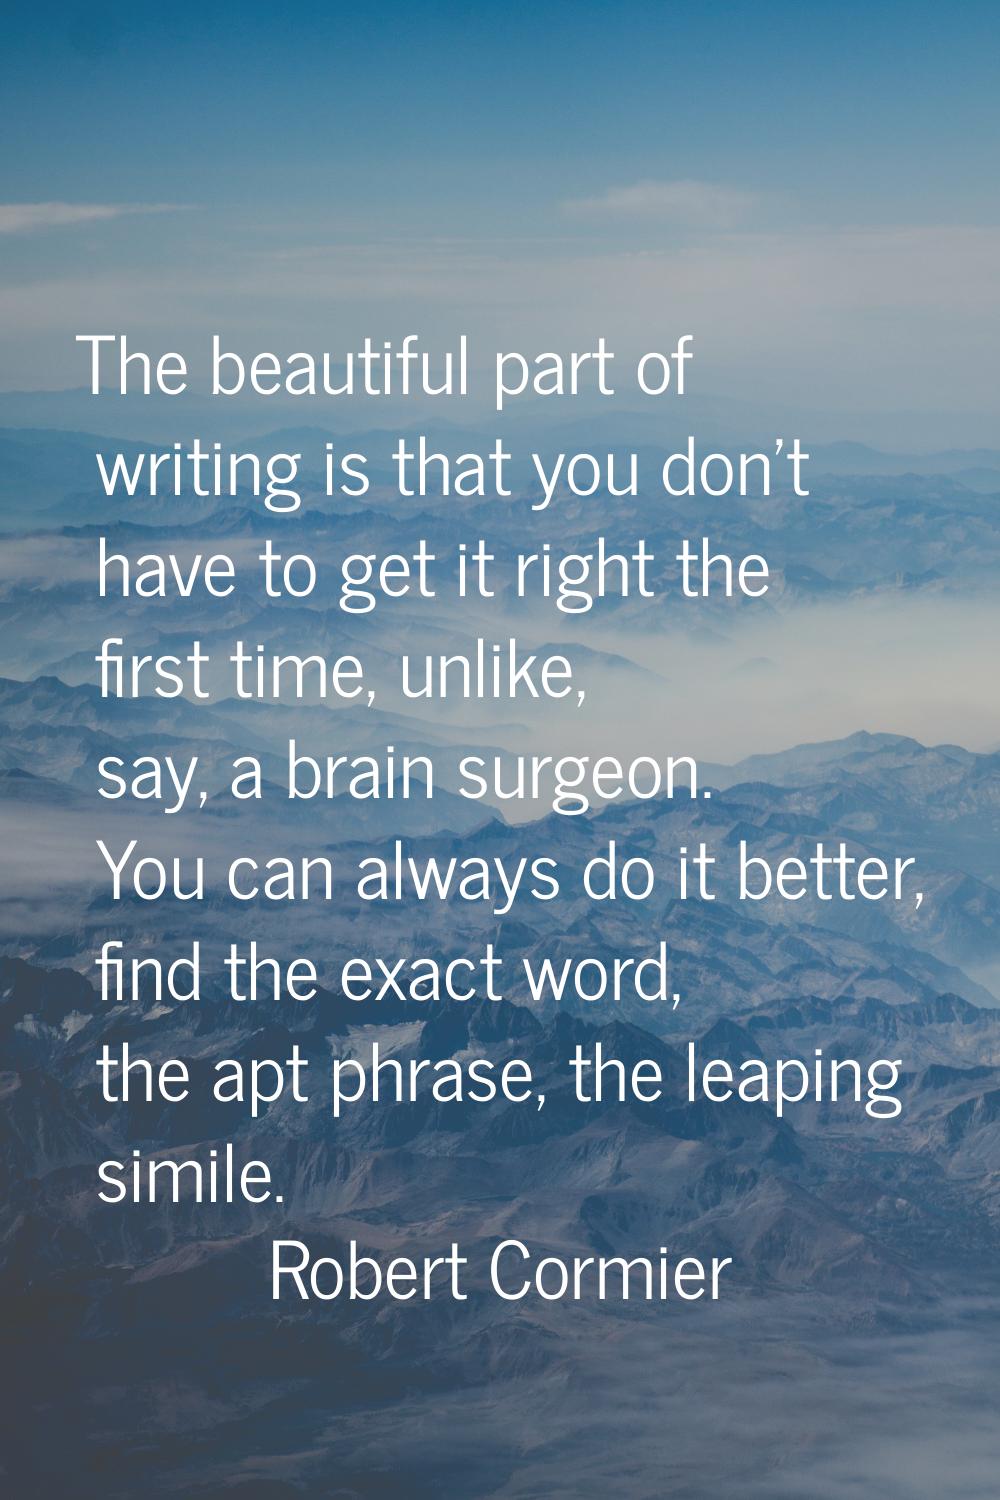 The beautiful part of writing is that you don't have to get it right the first time, unlike, say, a